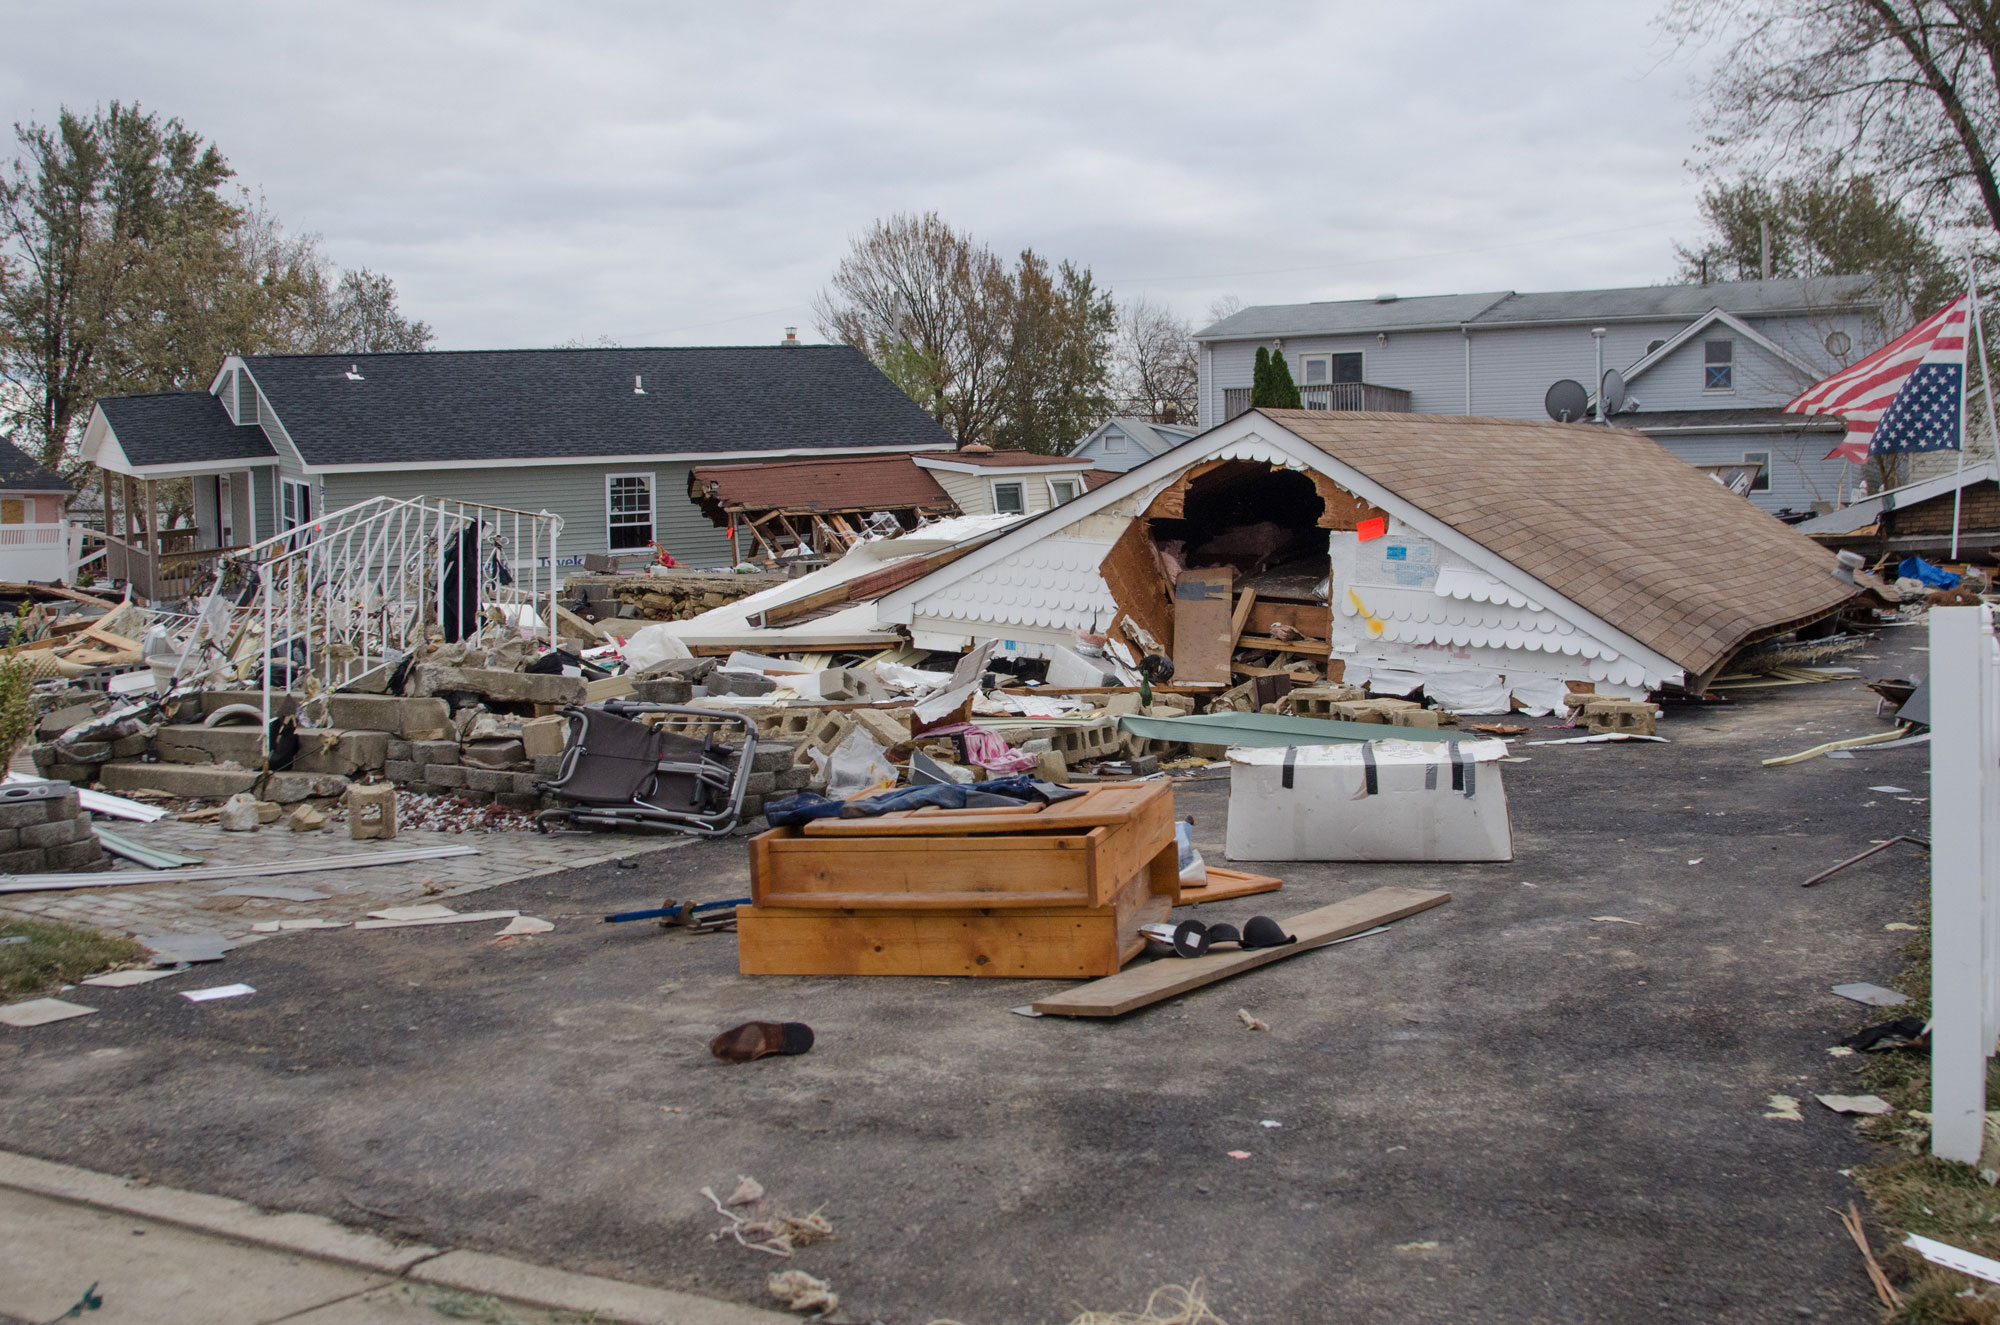 Photograph of damage in Union Beach, New Jersey, following Hurricane Sandy in 2012. The photo shows a house mostly swept away by the storm, leaving only a roof sitting at the end of the driveway. Stairs that formerly led to the house can be seen at left, and debris is strewn around. Other houses that were apparently less damaged stand in the background.